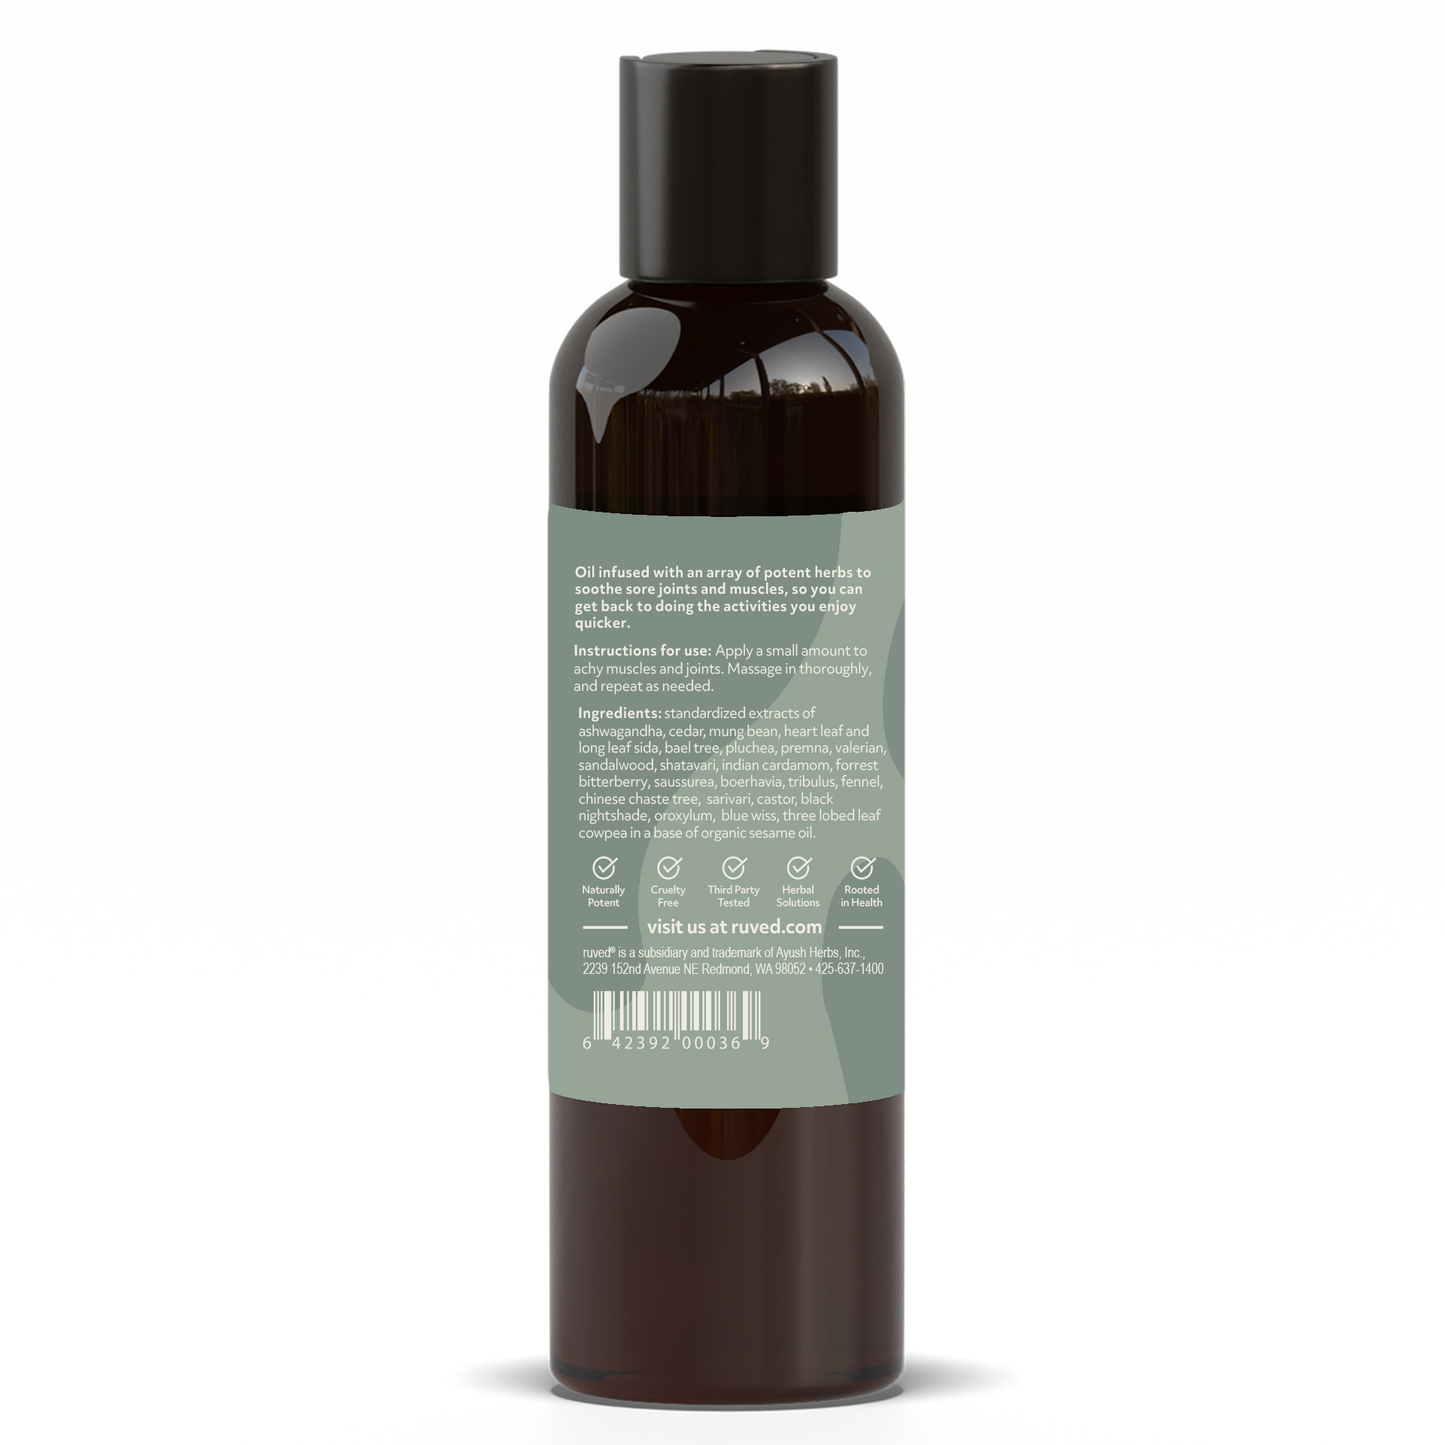 Active Body Massage Oil Supplement Facts Back Side - Organic Blend for Muscle Relief and Relaxation, 100ml Bottle.